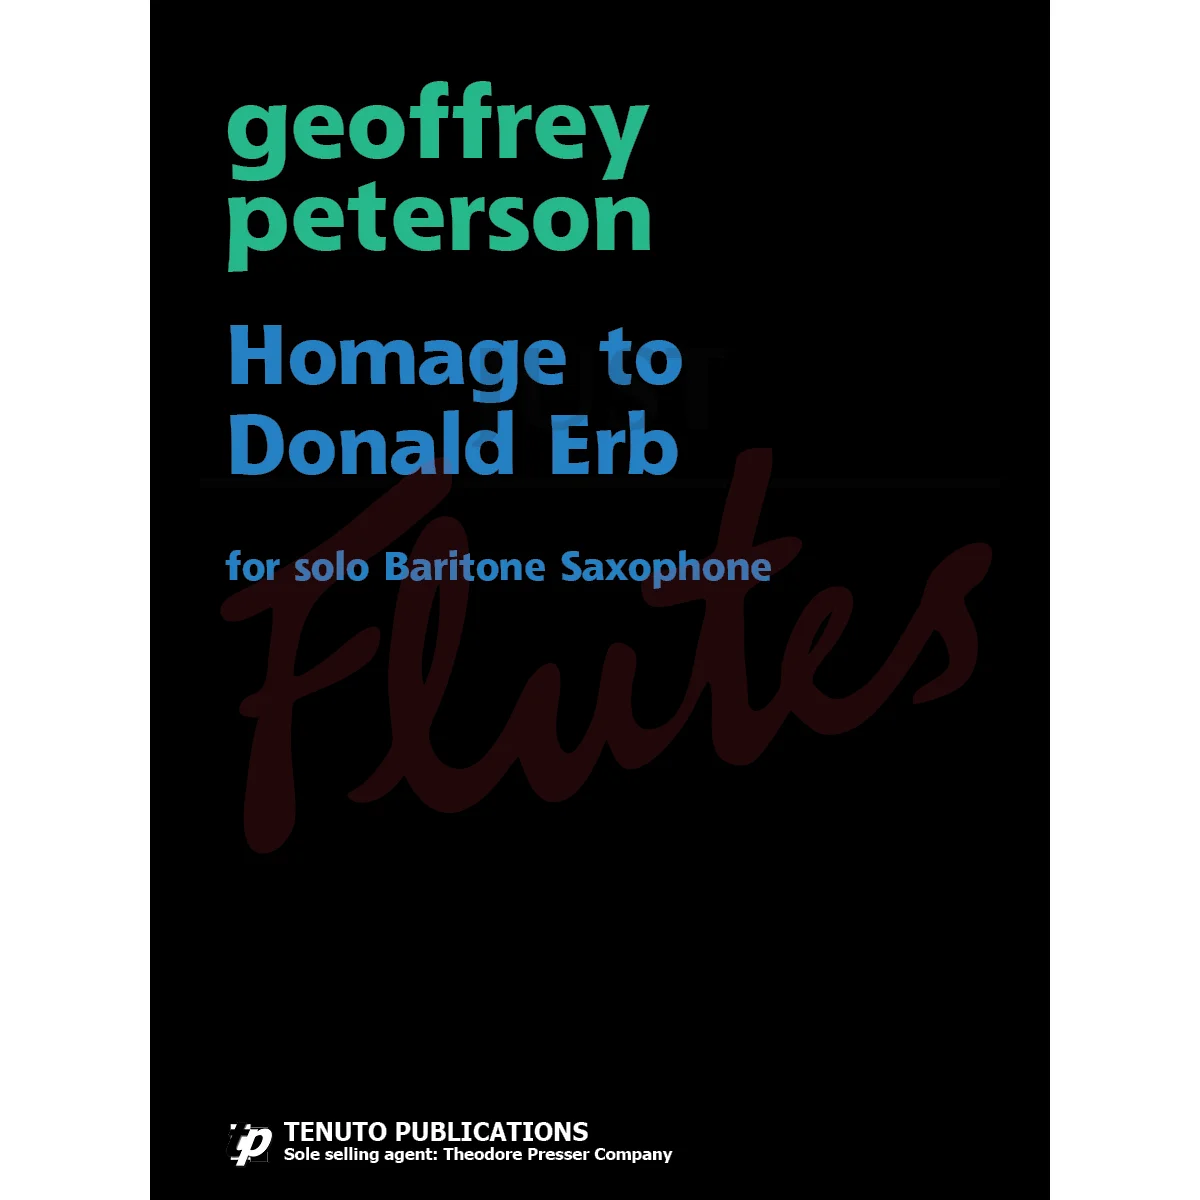 Homage to Donald Erb for Baritone Saxophone